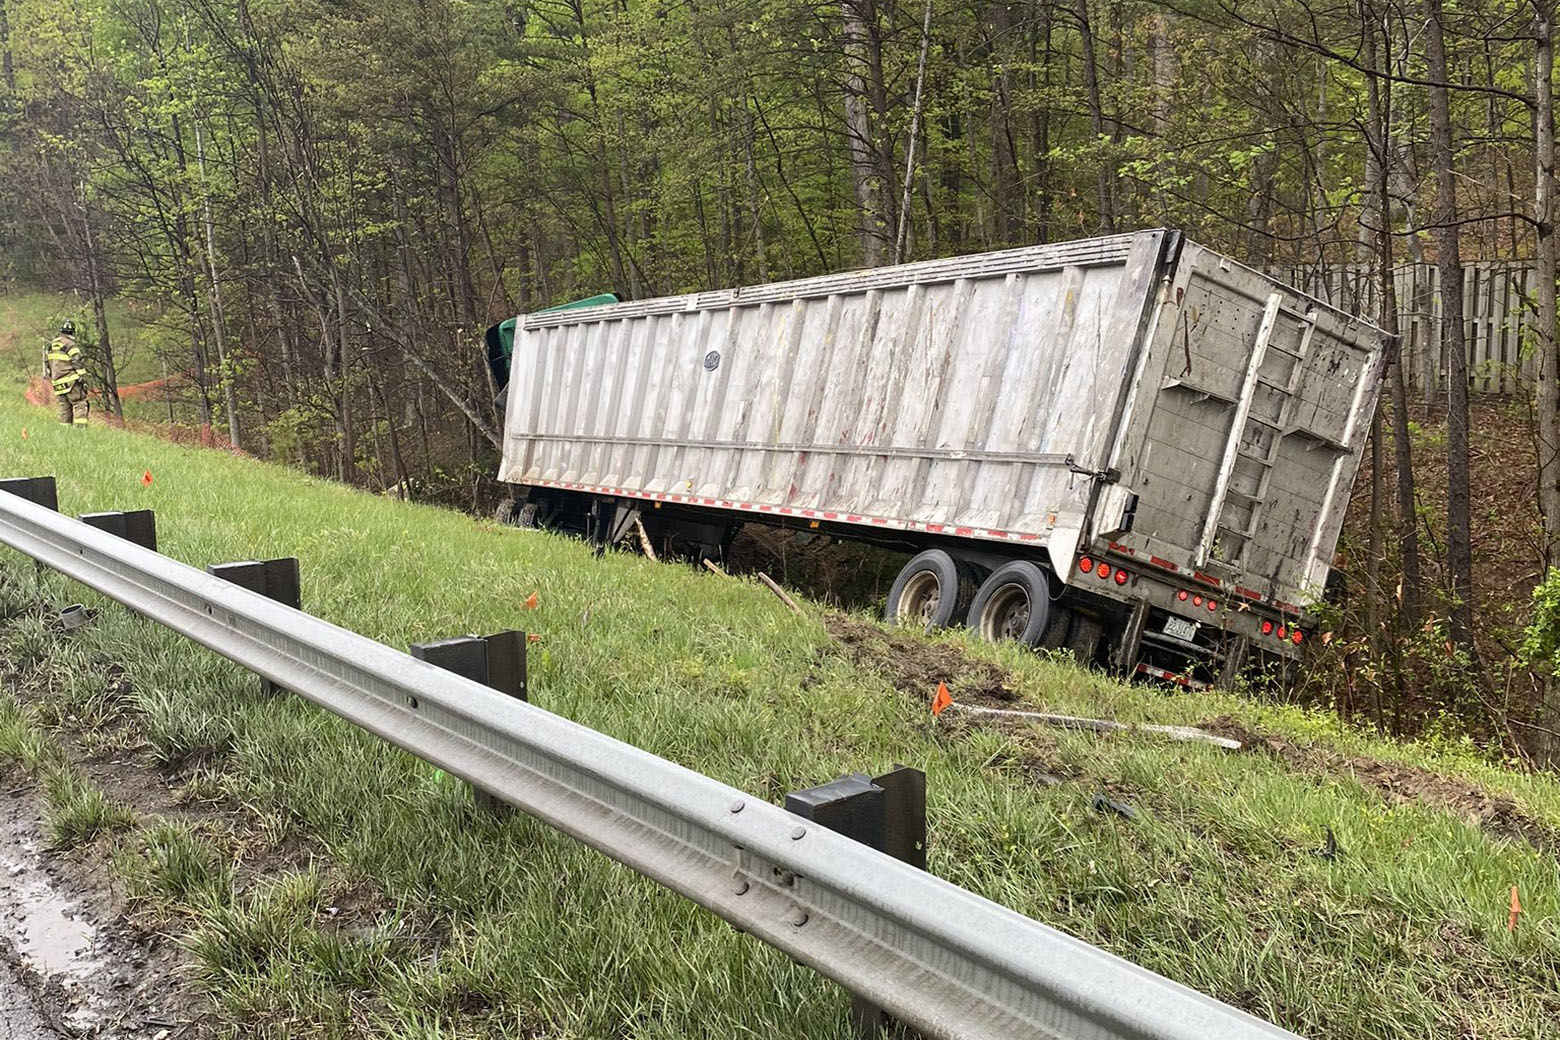 A crash late Monday morning between two trucks, including a car carrier and a trash hauler, jammed traffic on Interstate 95 around Fredericksburg in Stafford County, Virginia, leading to an 11-mile backup. 